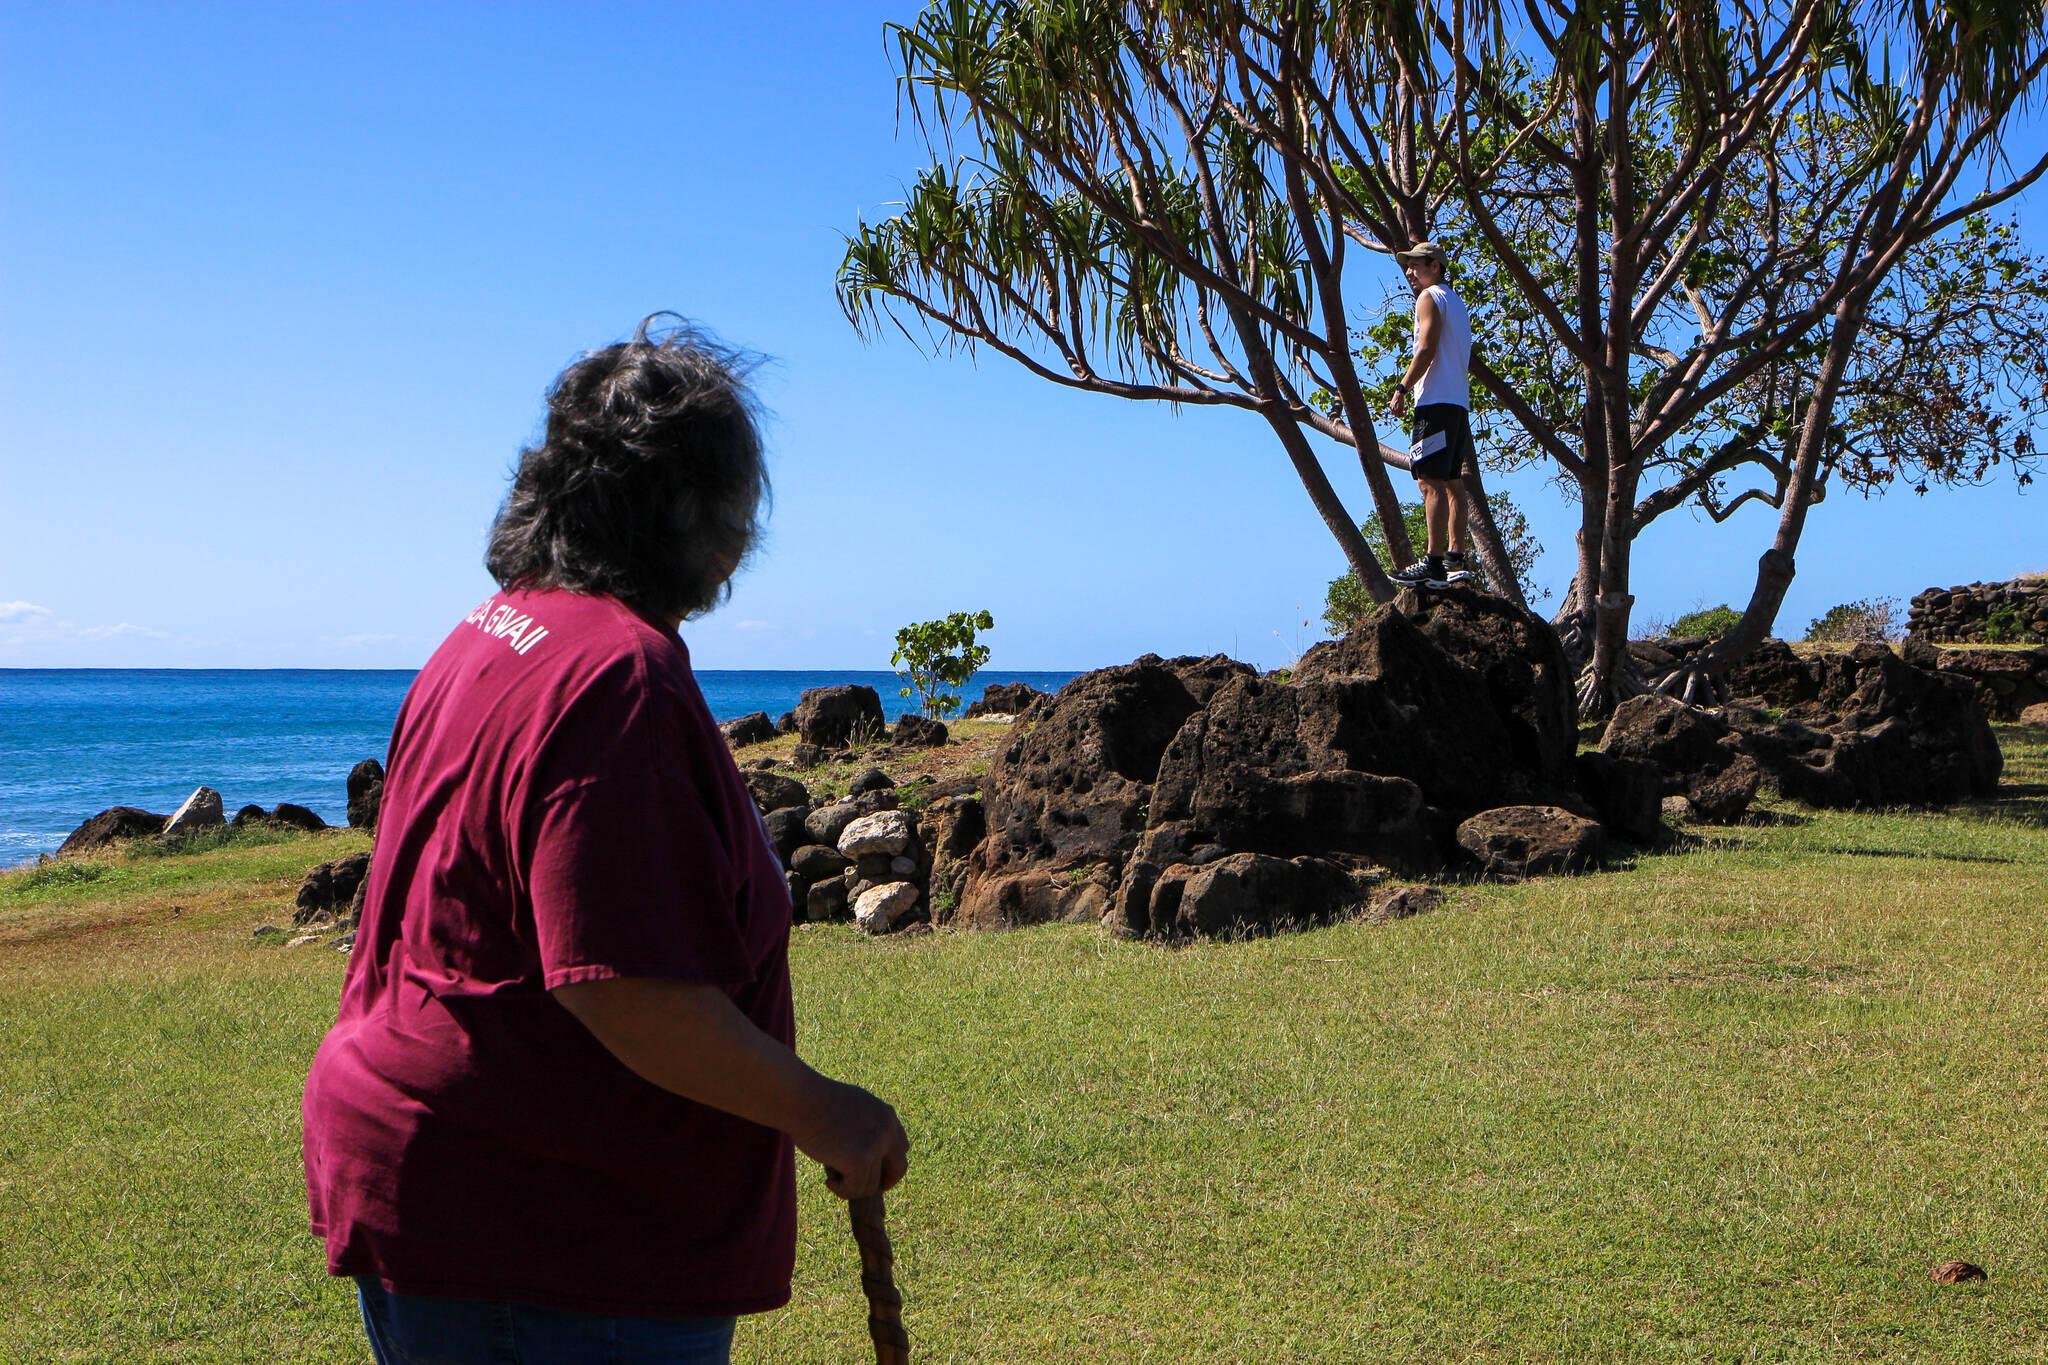 Members of the Kake Cultural Healing Center Advisory Council visit Pokai Bay on the Waianae Coast of O’ahu. This photo features Joel Jackson (foreground) and Simon Friday (background). (Courtesy Photo / Lauren Tanel)